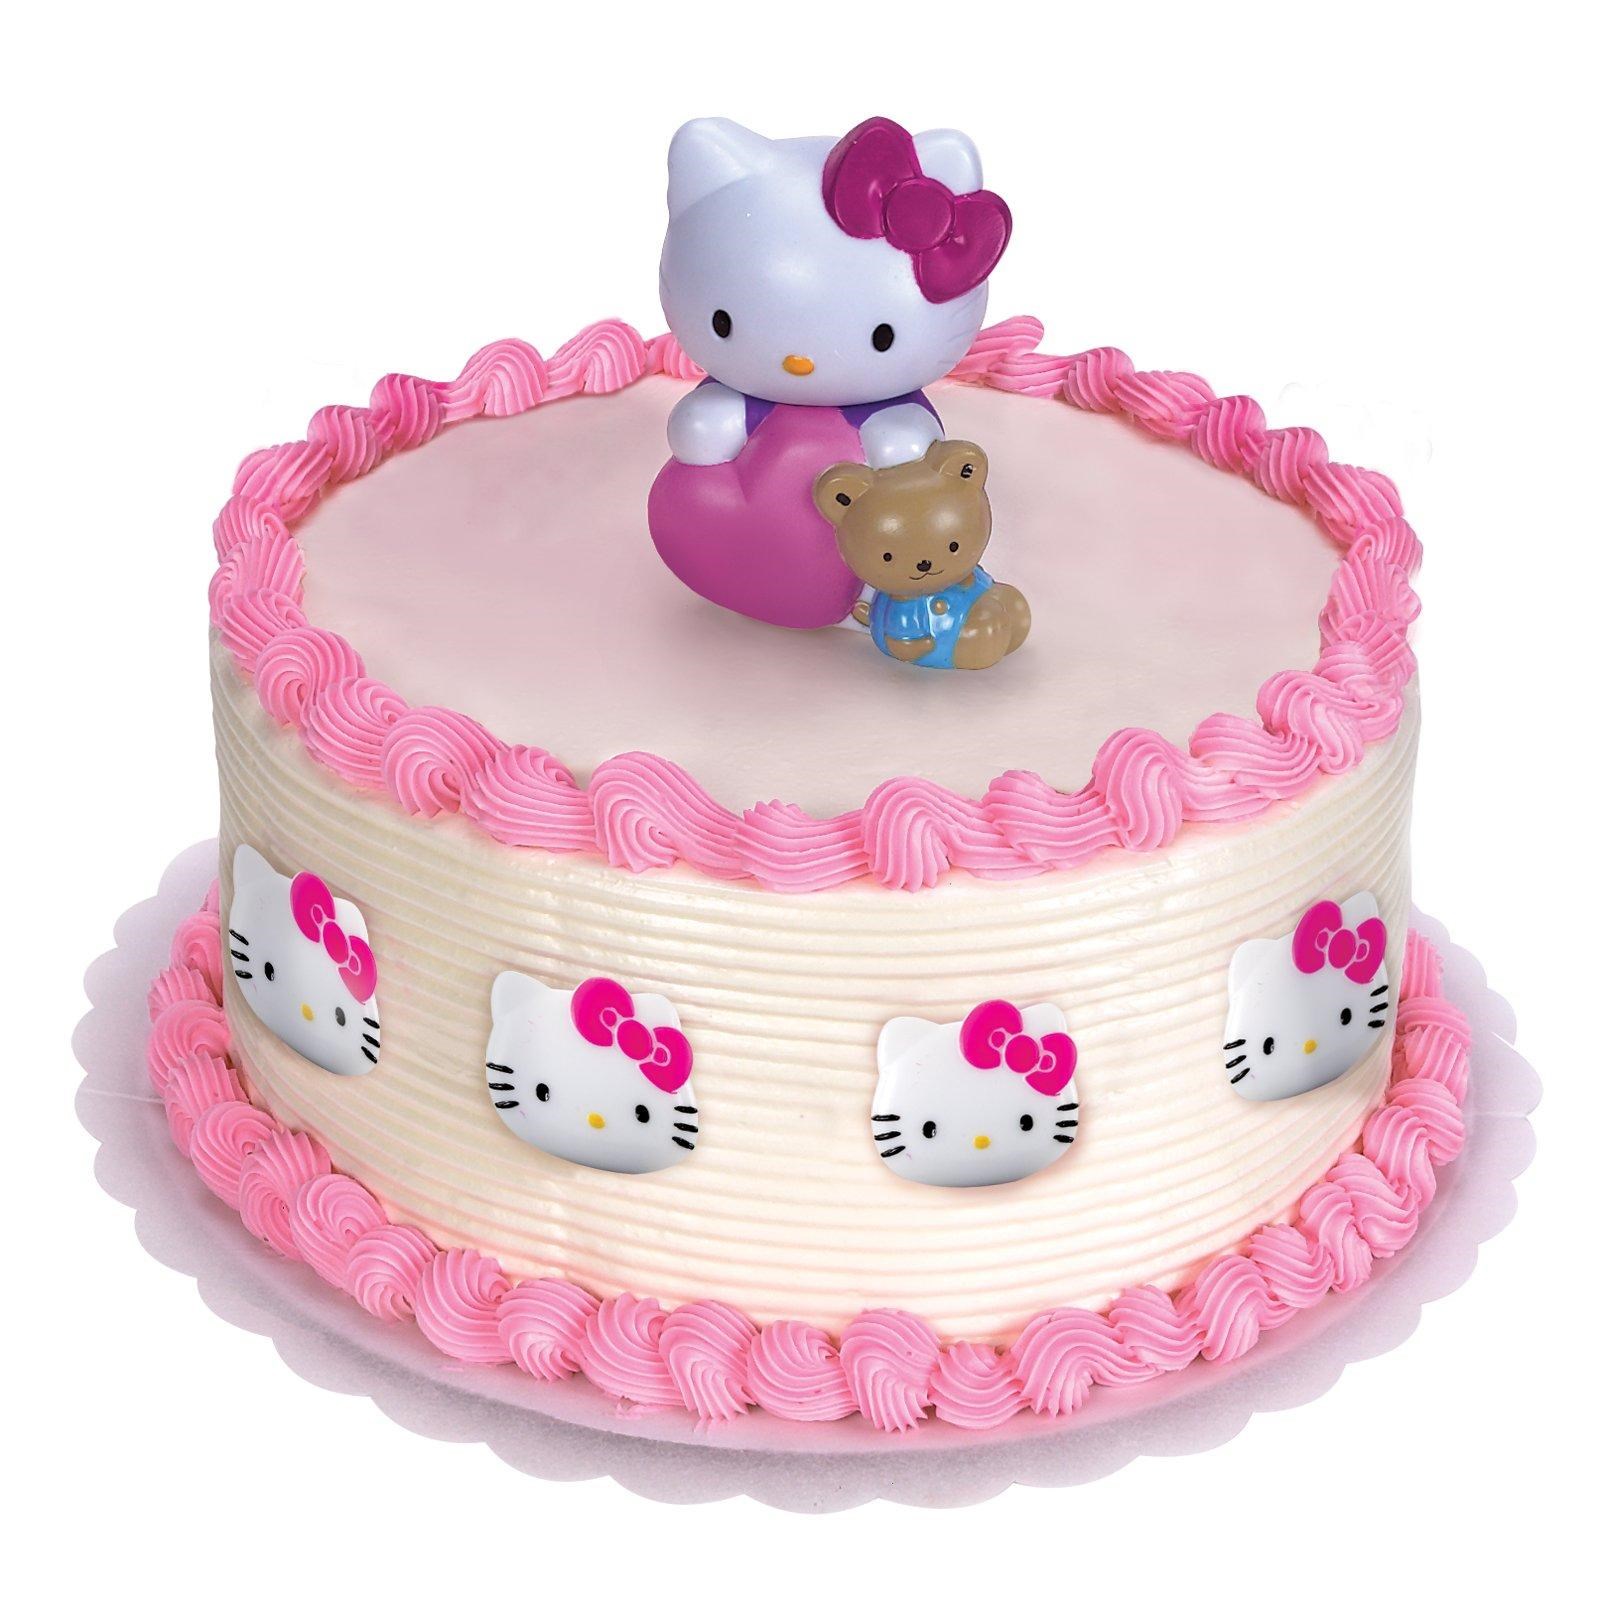 hello-kitty-cake-topper-and-8-rings-bx-42897a.jpg